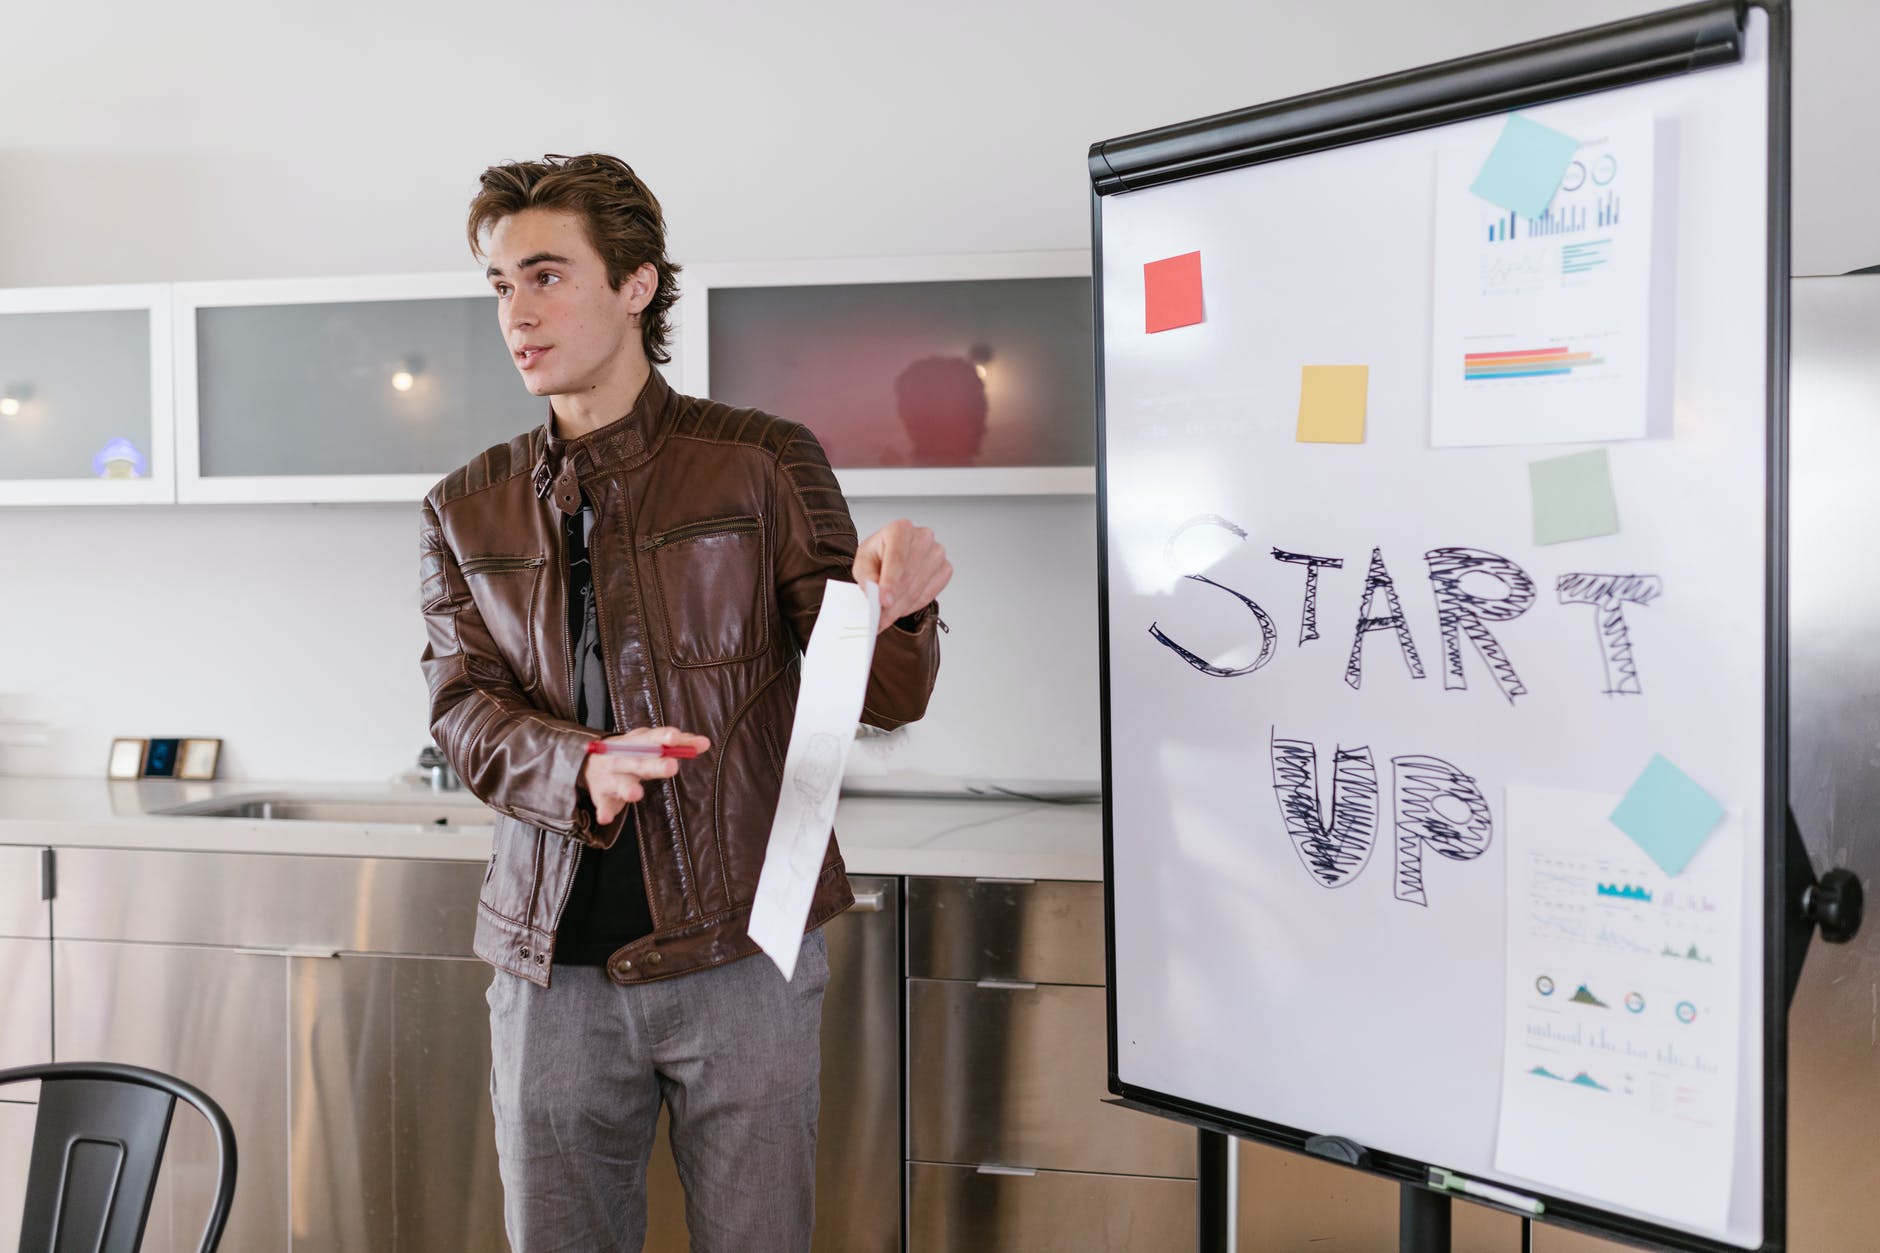 Funding Your Start-Up